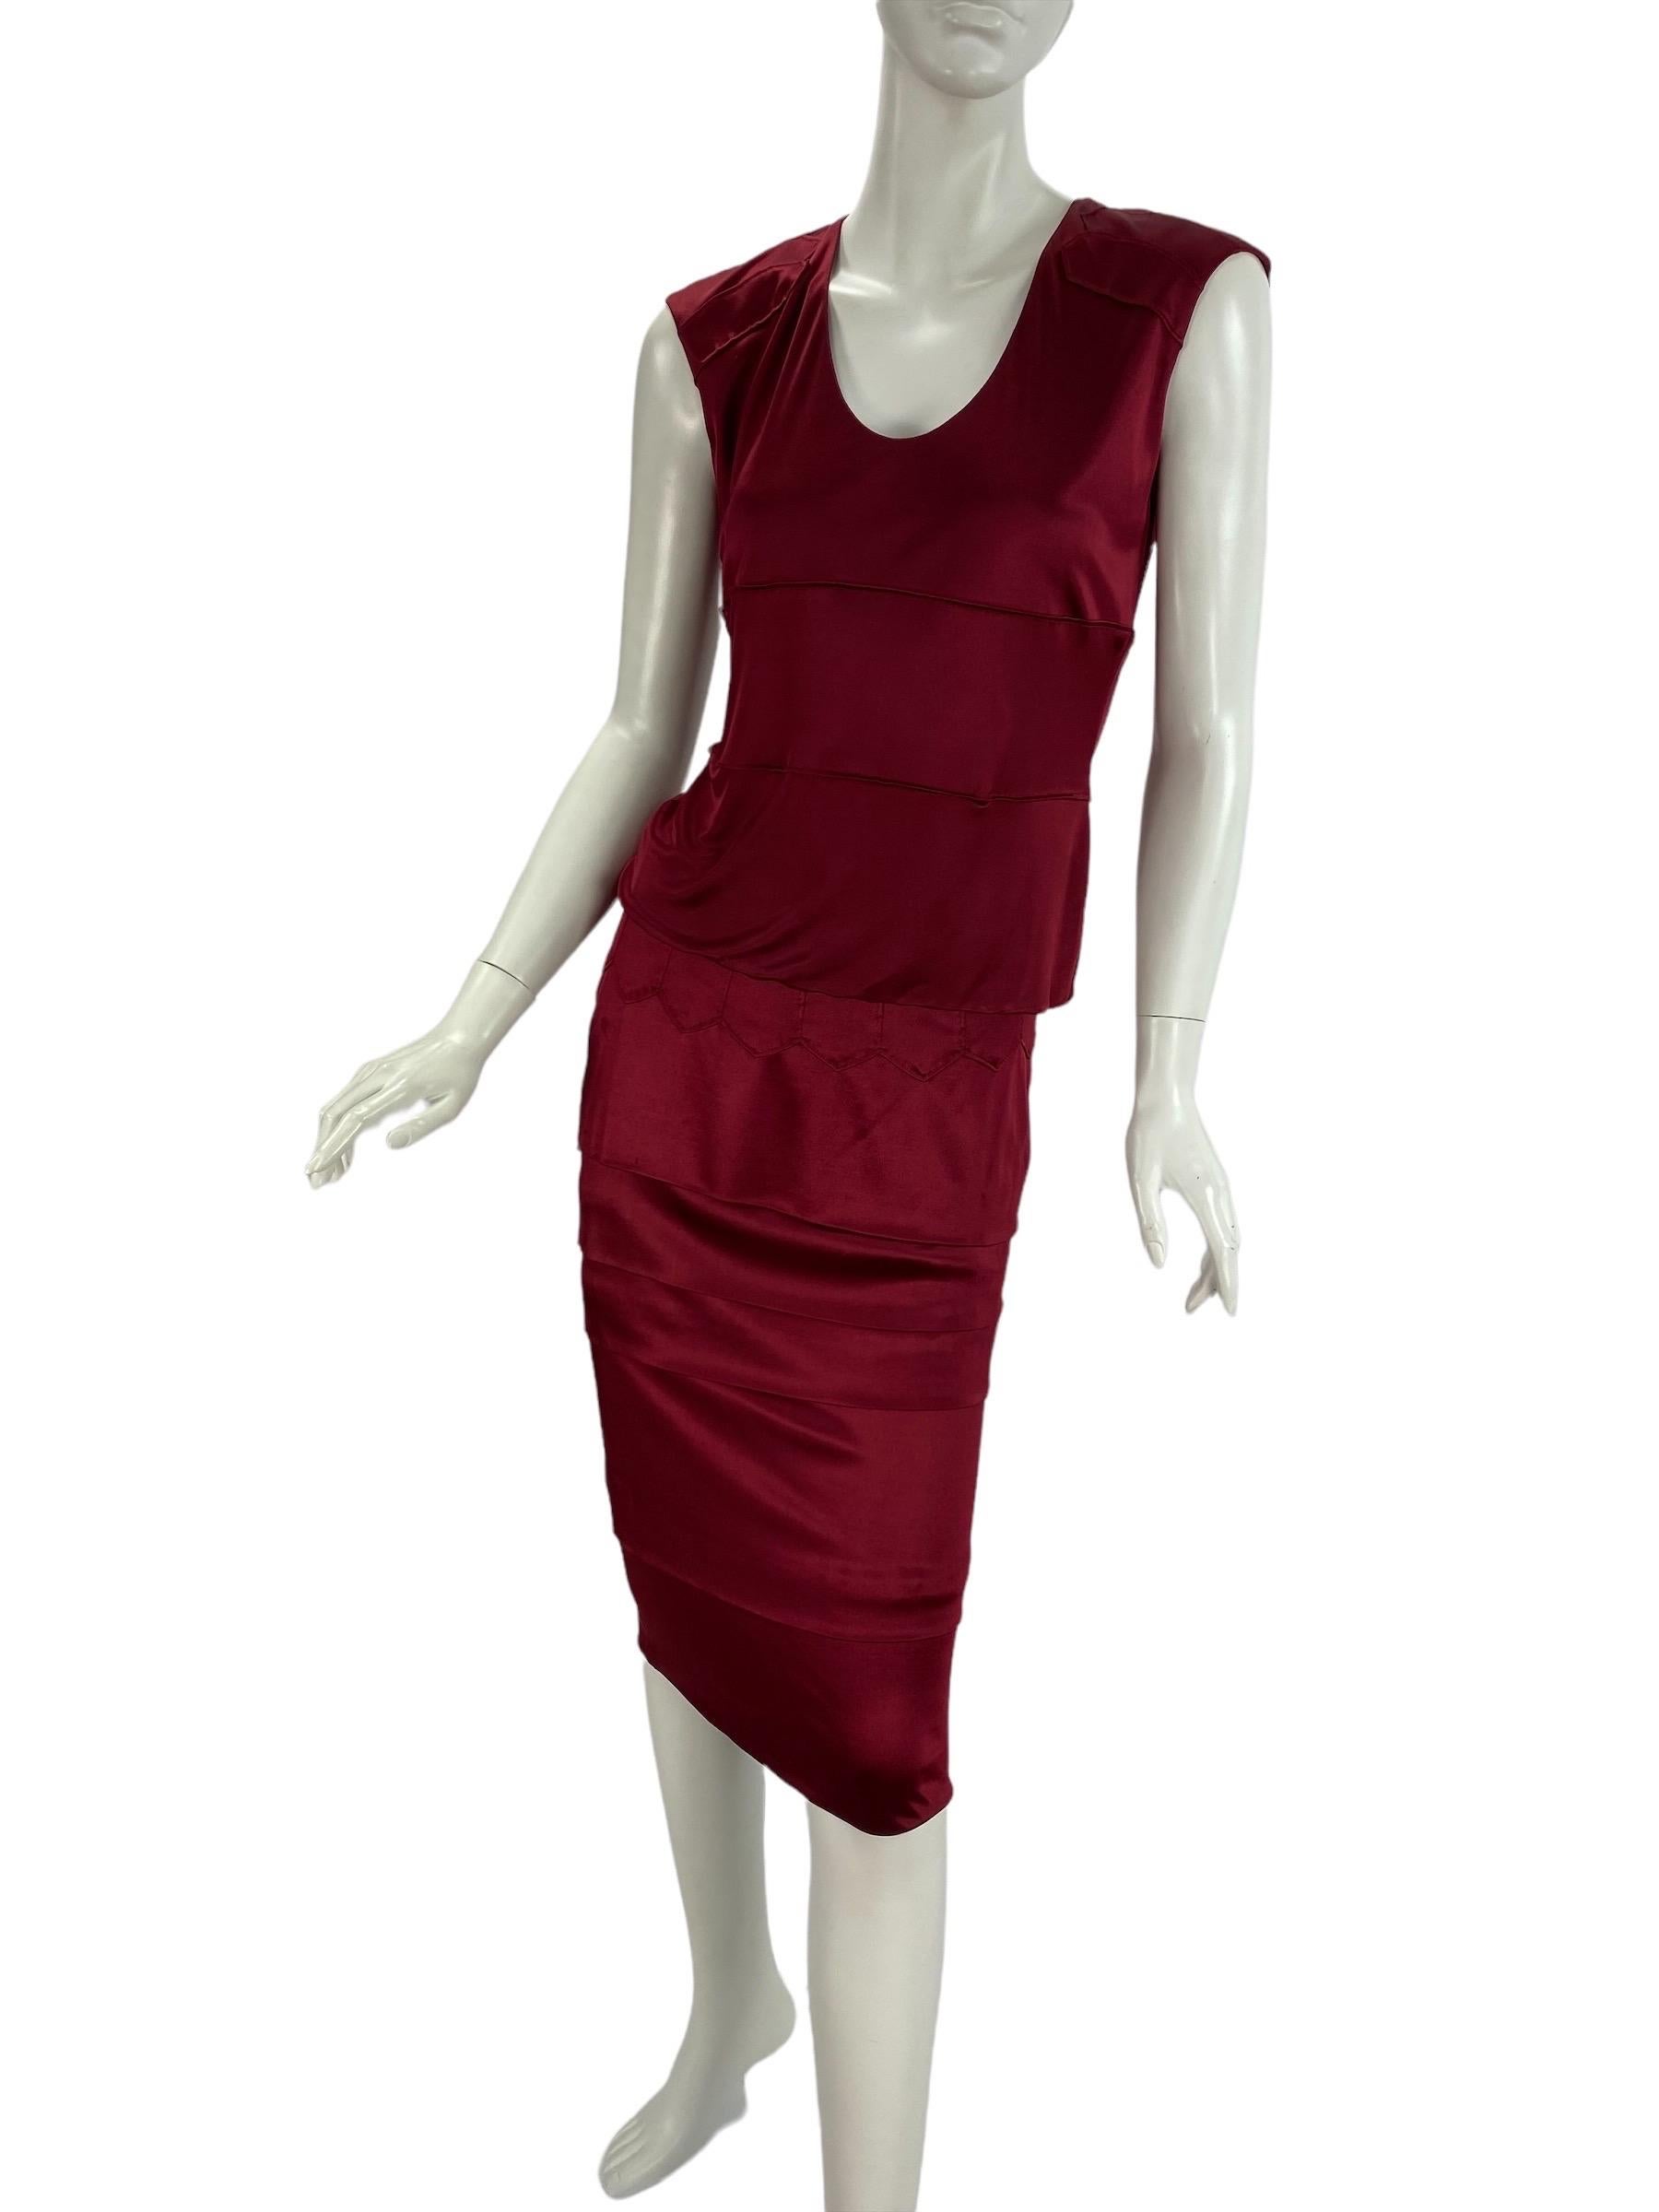  Vintage Tom Ford for YSL Burgundy Red Jersey Skirt Suit
F/W 2004 Collection
Size S
Top measures: Bust 32-38 inches, Length 20